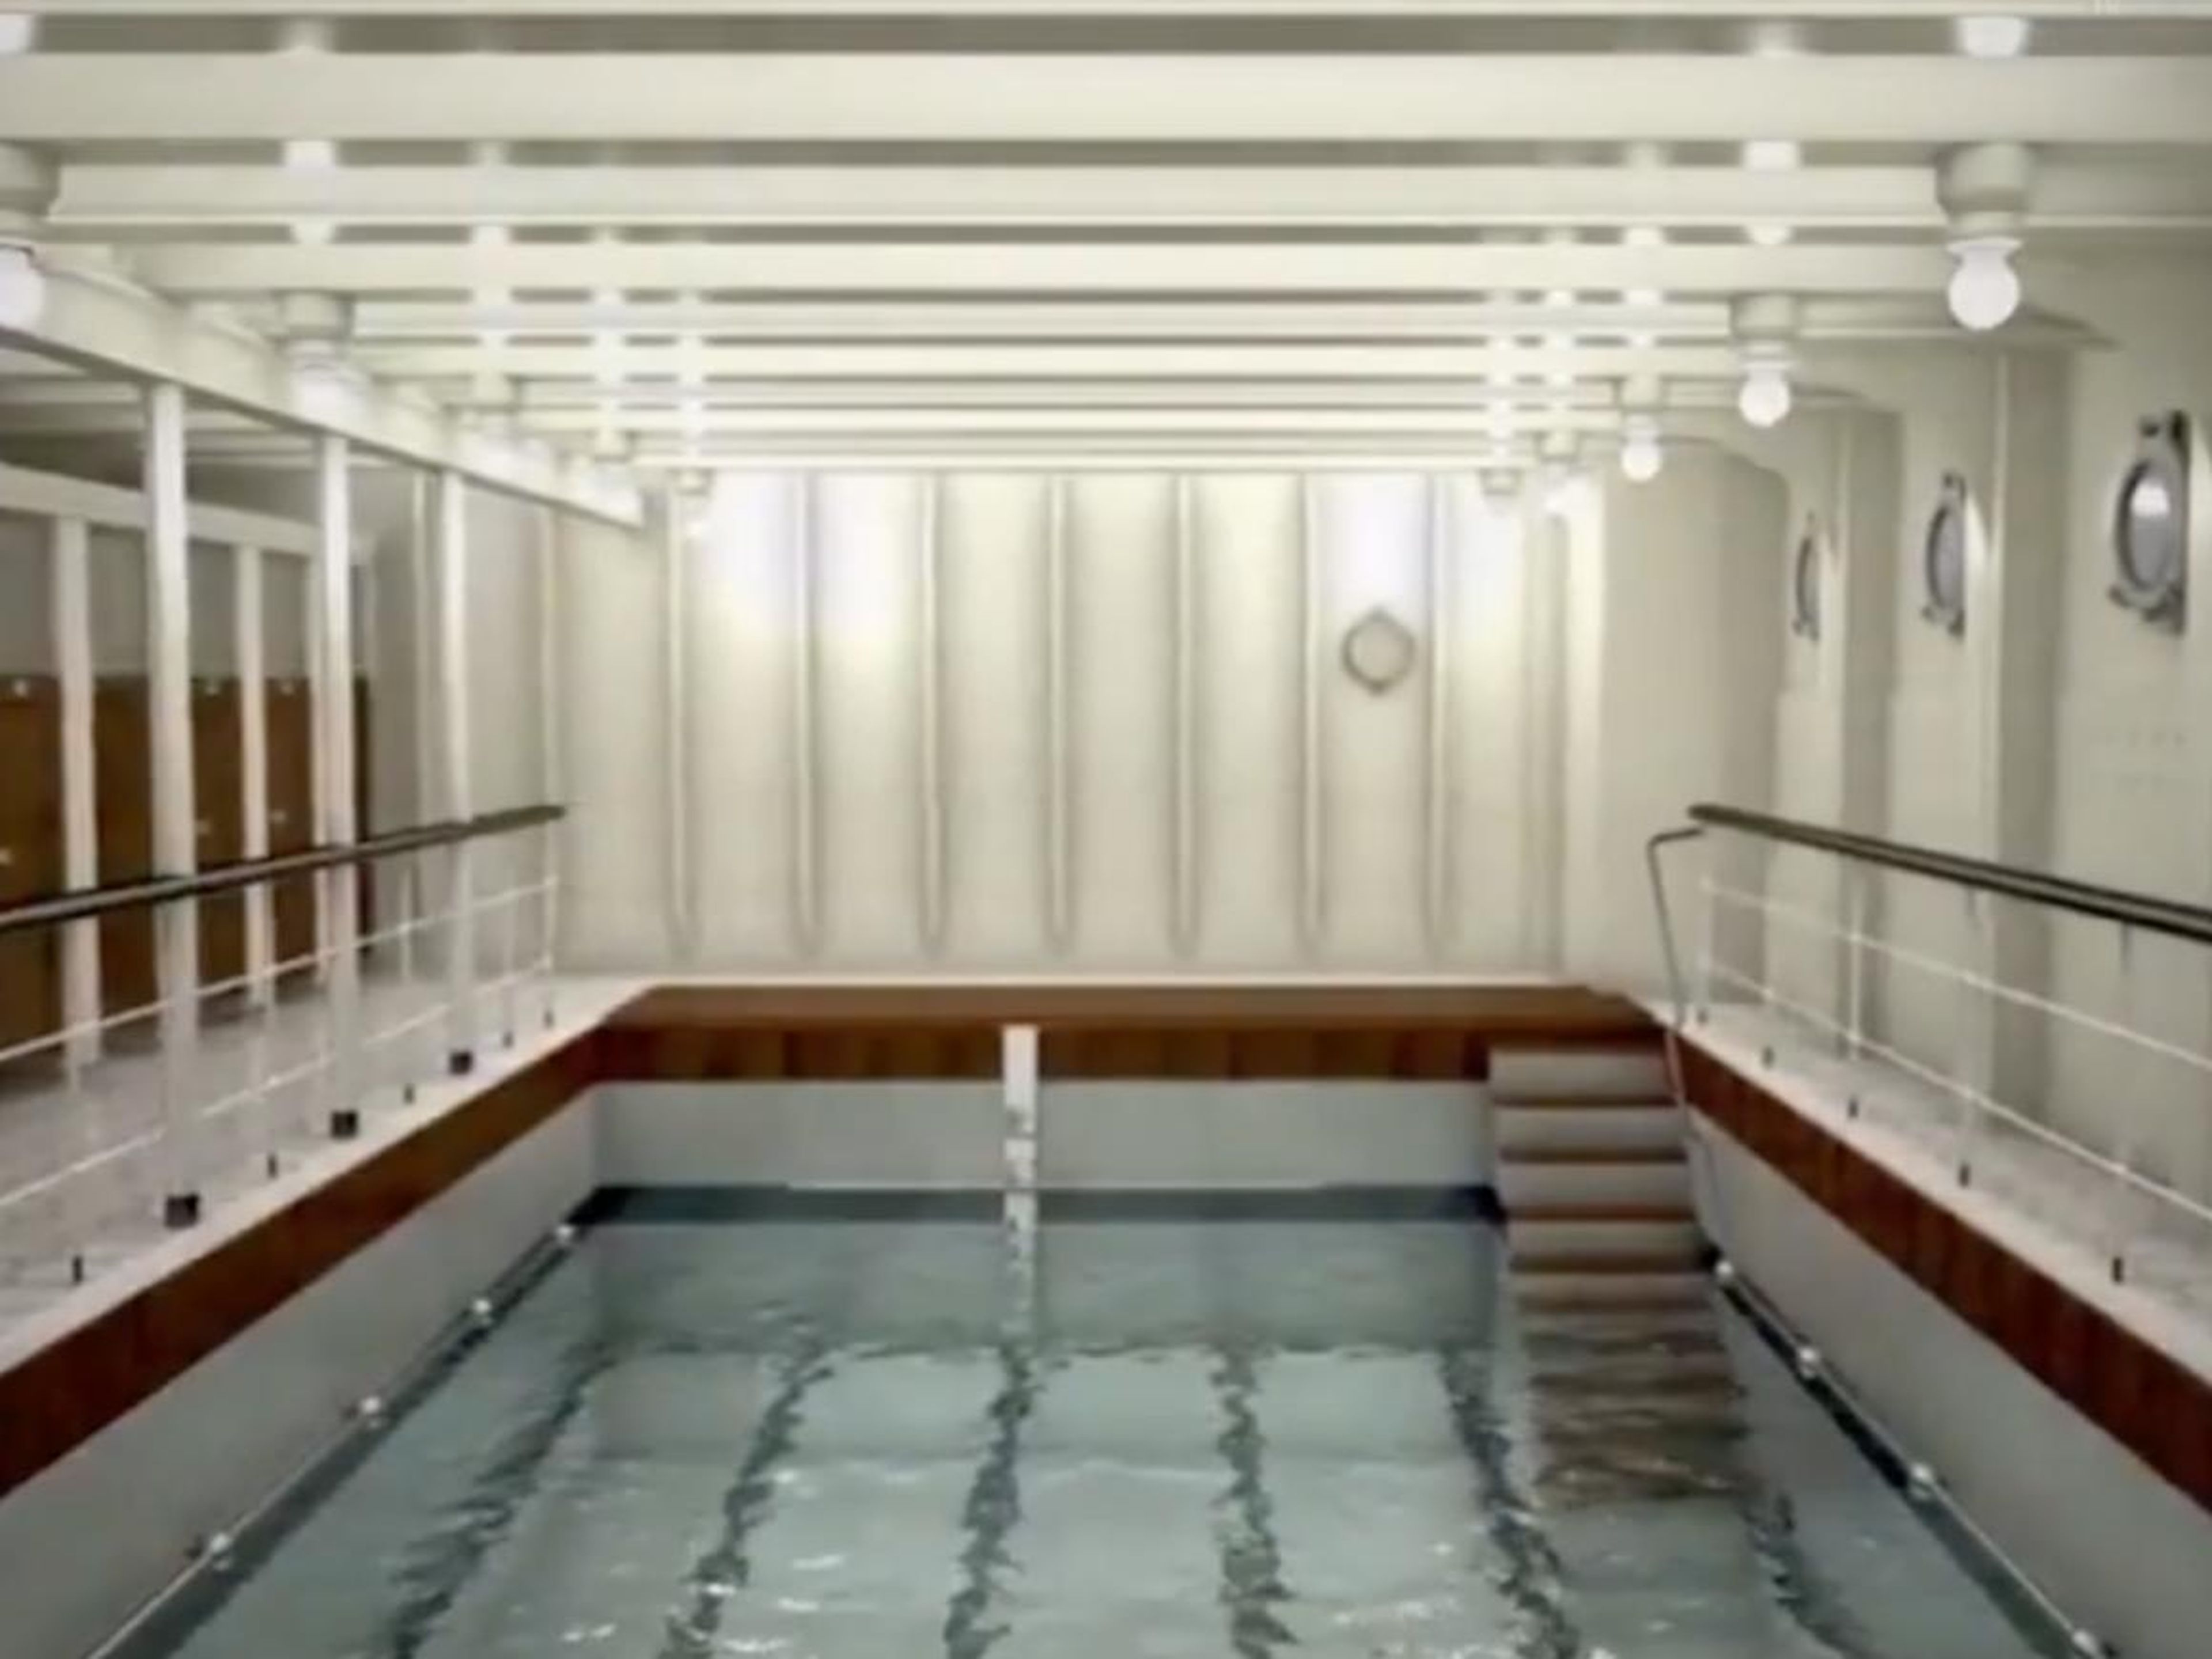 The Titanic ll would have a similar pool, porthole windows included.